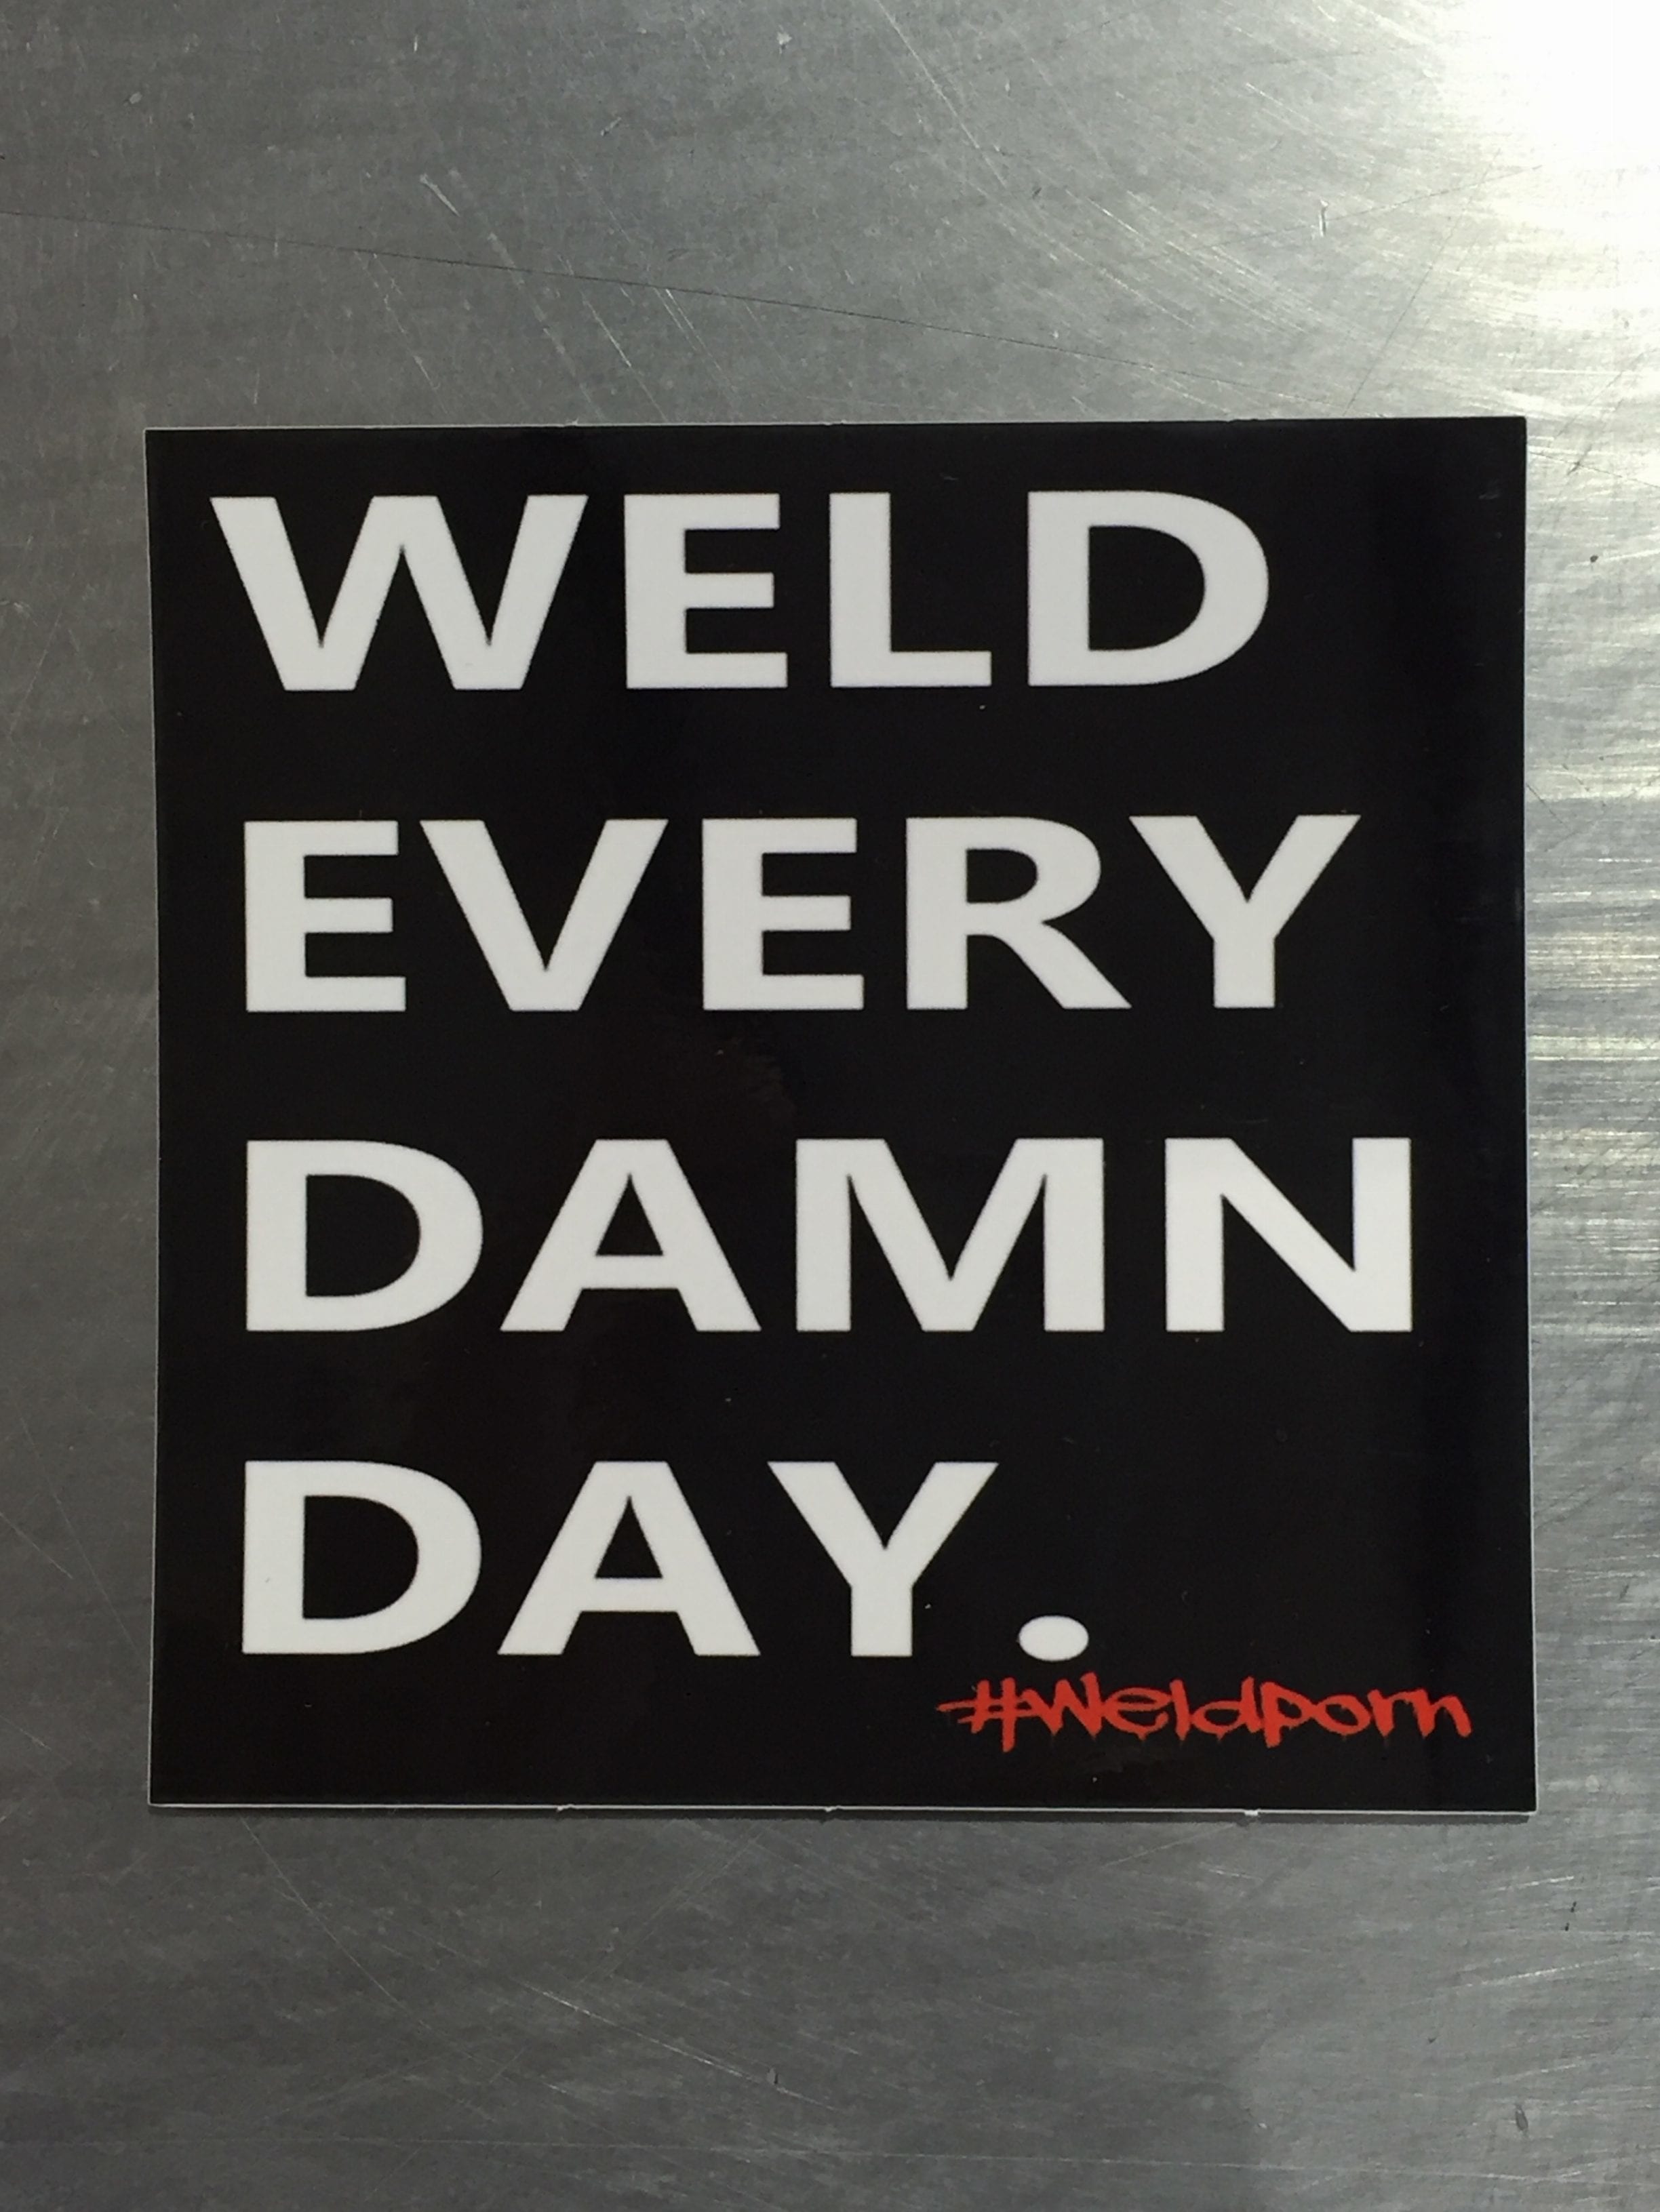 WELD EVERY DAMN DAY STICKER  by Outlaw Leather.